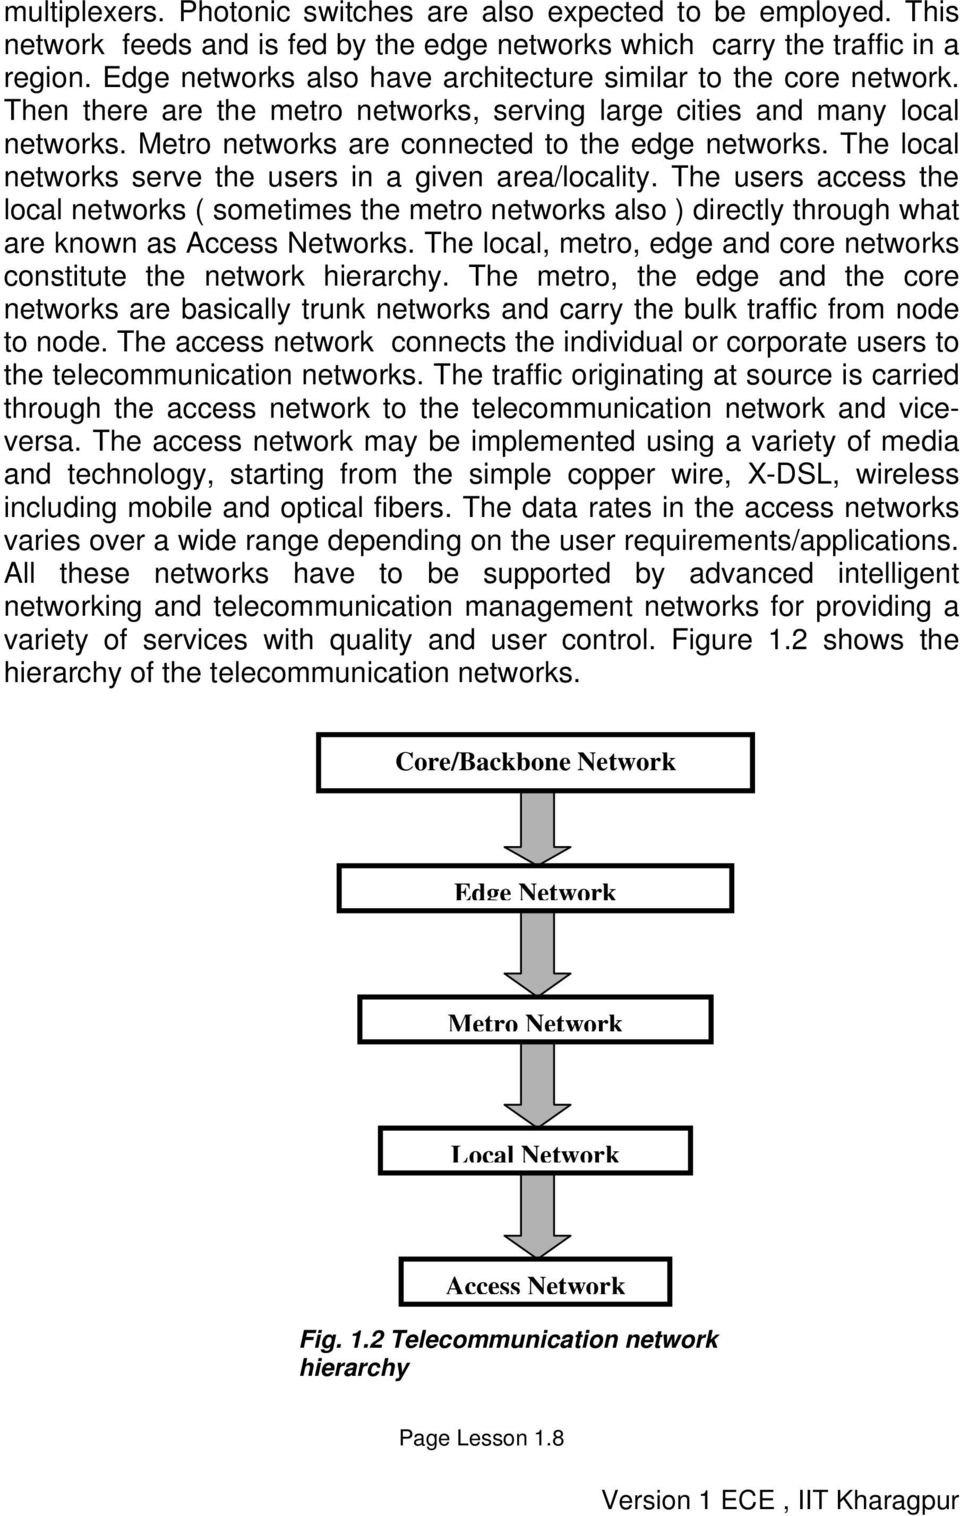 The local networks serve the users in a given area/locality. The users access the local networks ( sometimes the metro networks also ) directly through what are known as Access Networks.